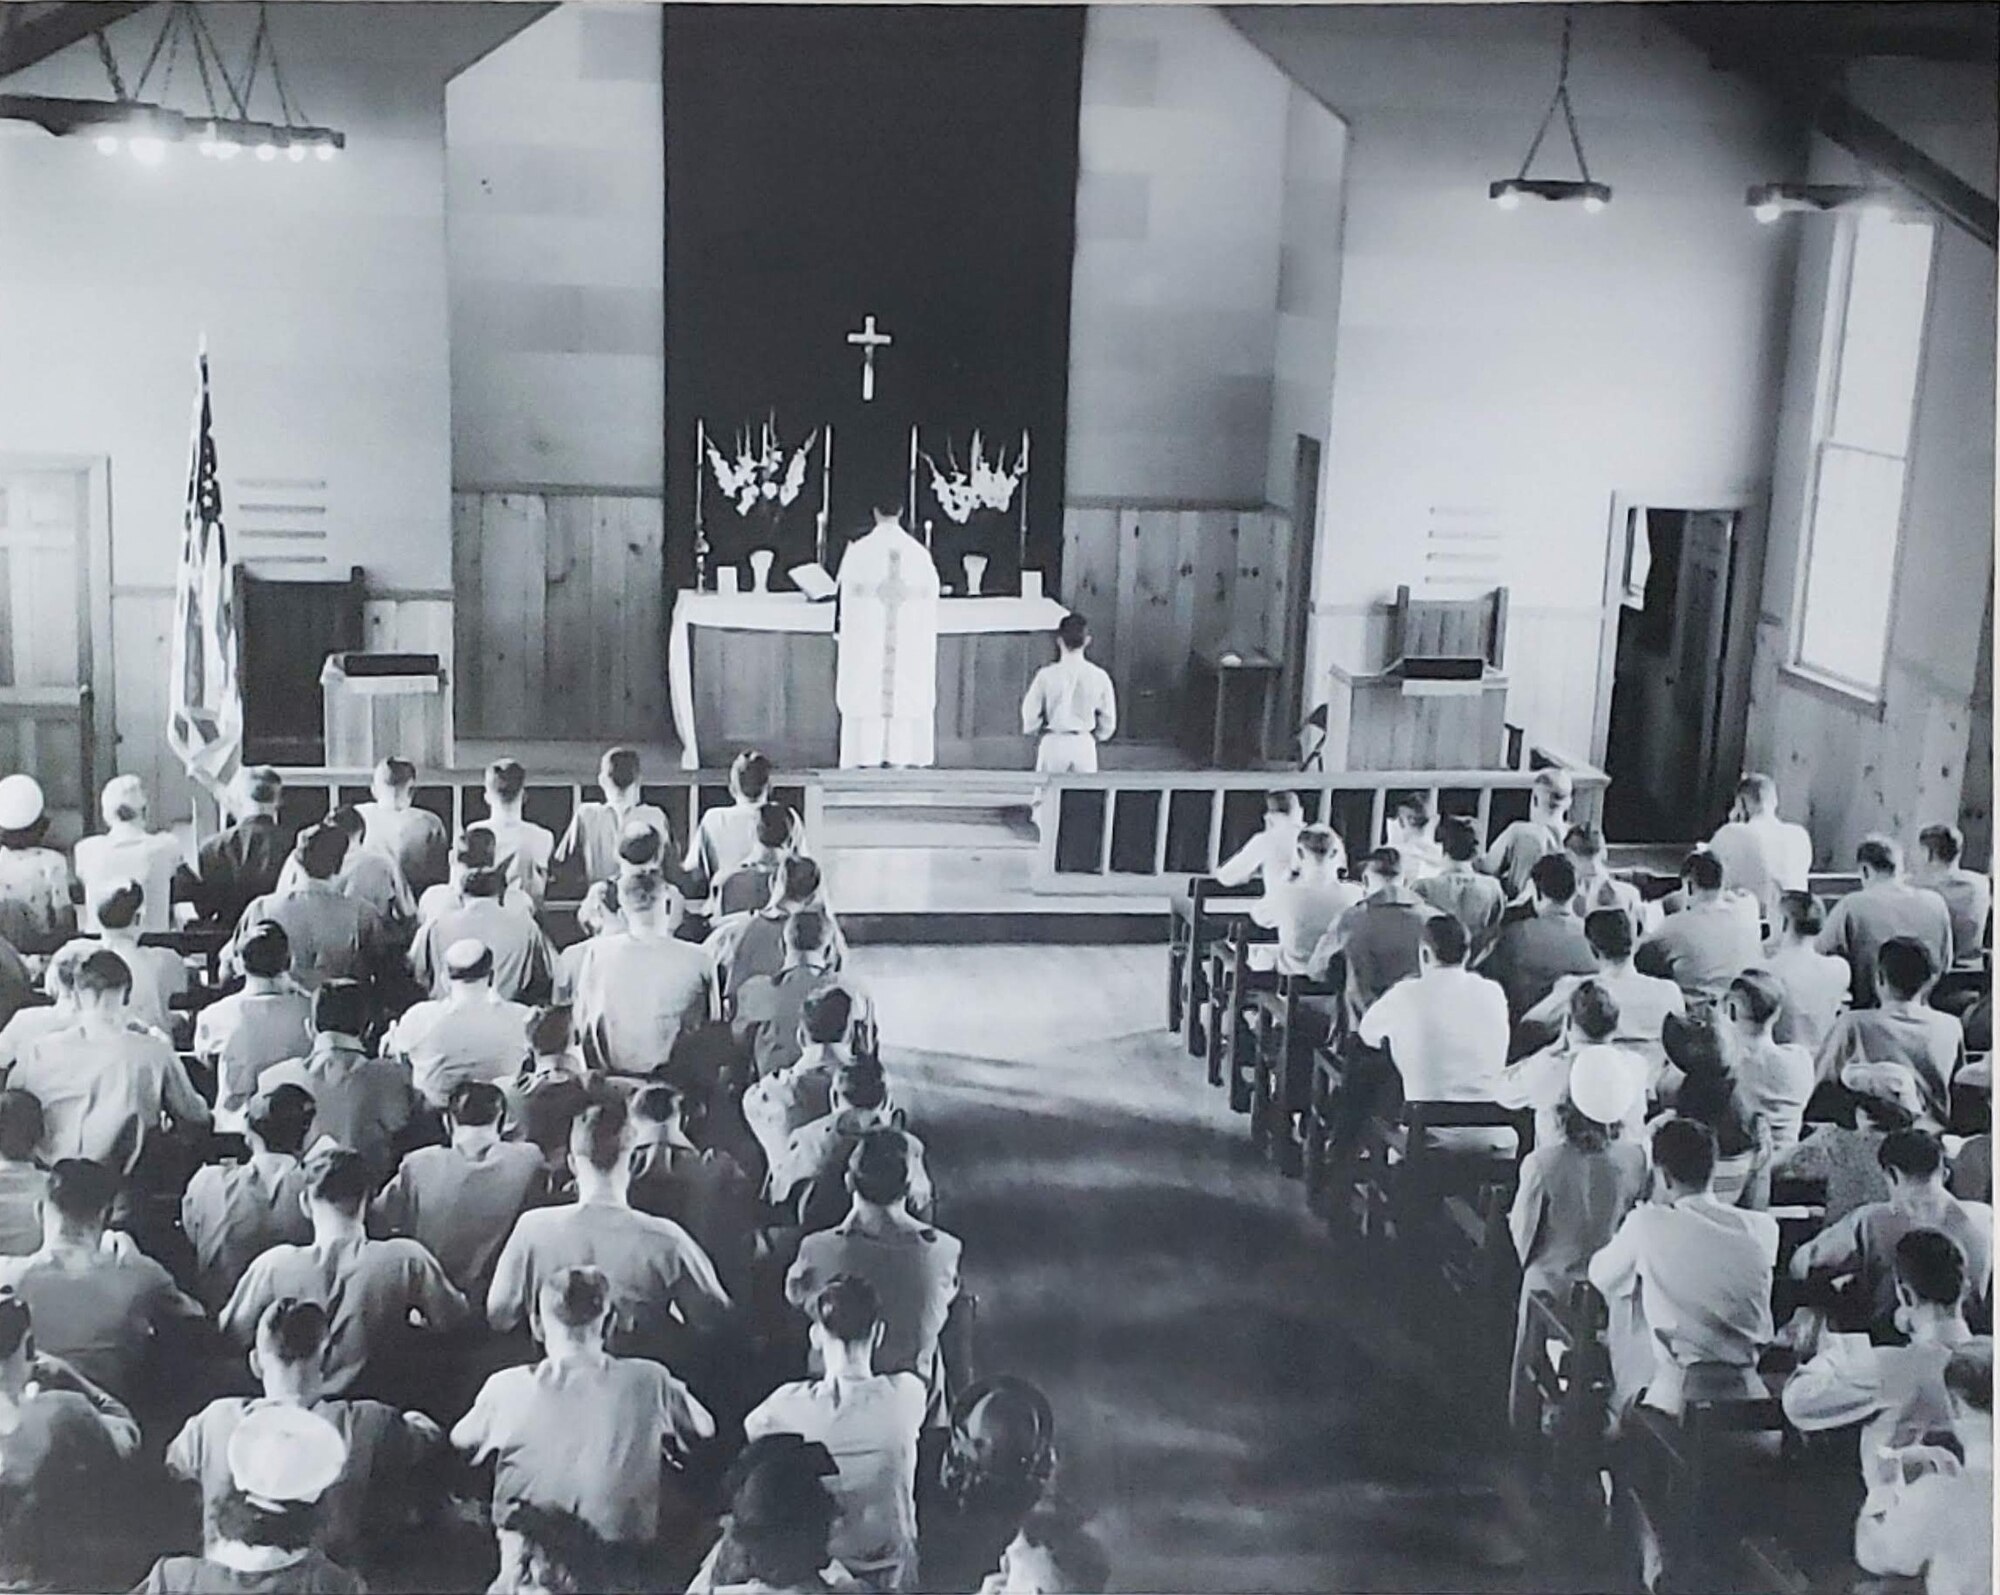 A photo taken in the Columbus Air Force Base Chapel during the 1940s at a Catholic Mass. (Courtesy photo)